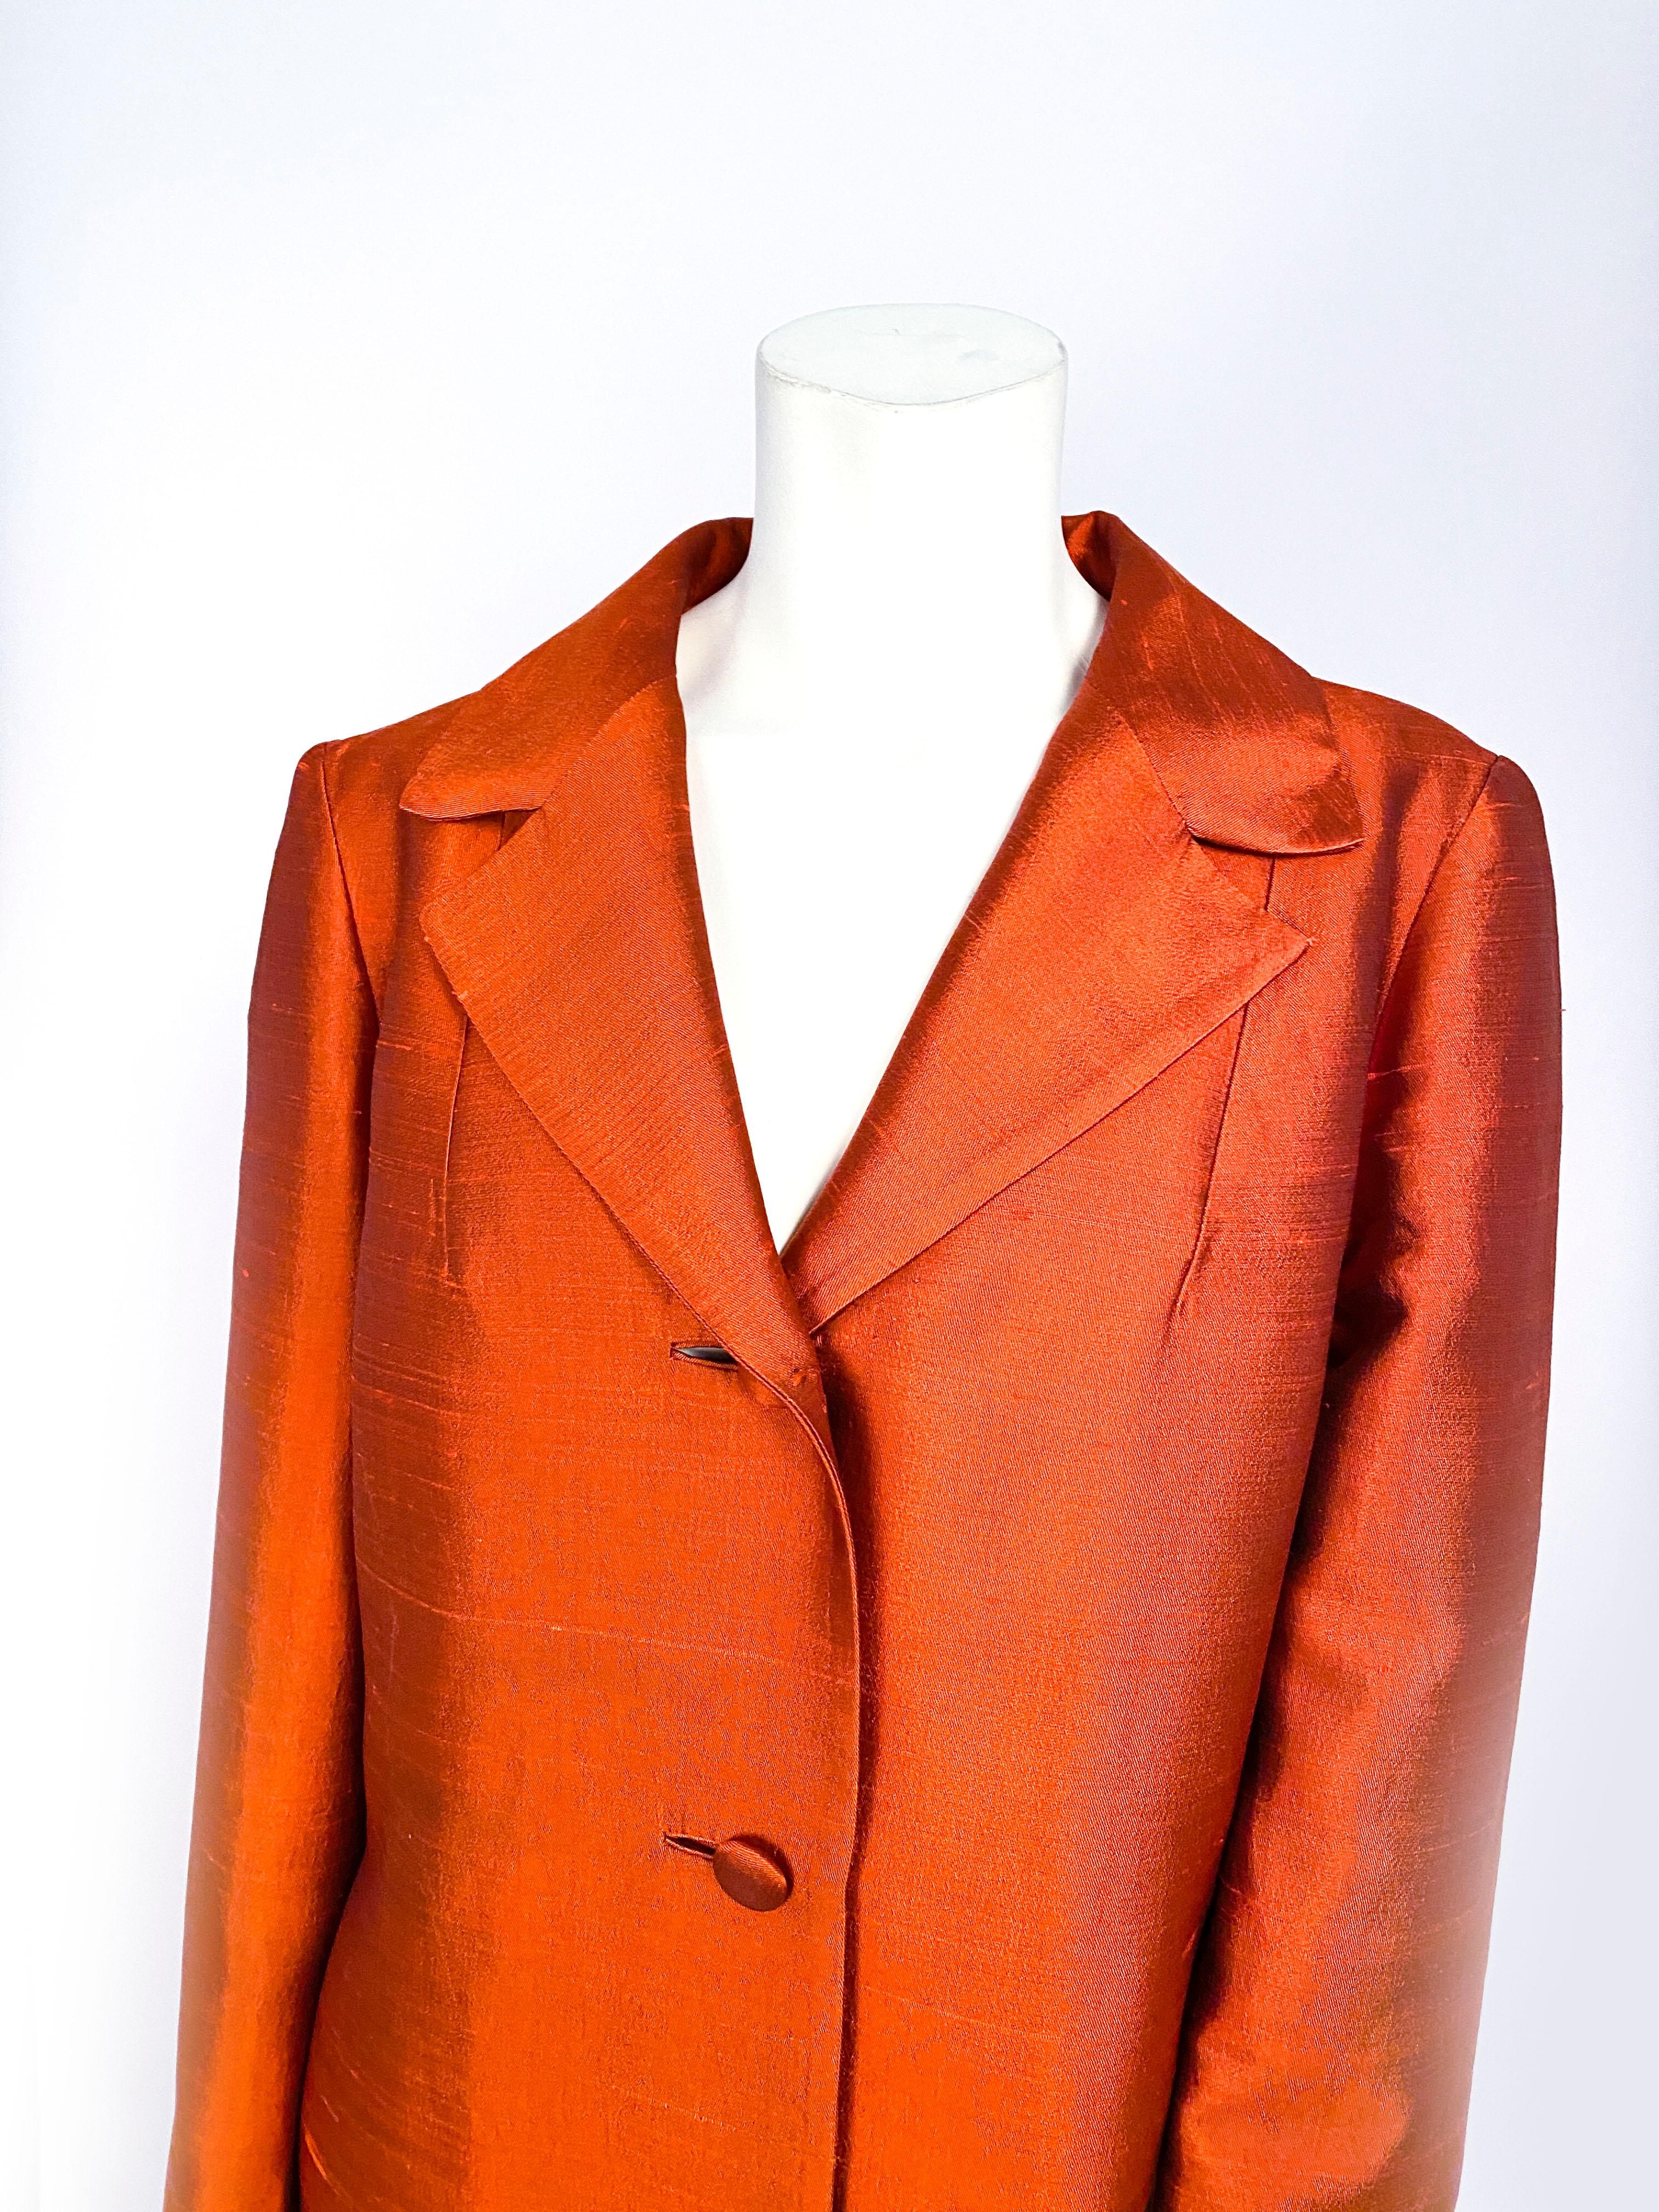 1960s Lilli Ann rust-colored coat in raw silk. The textile has an iridescence to add a reflective sheen. The face has covered buttons, inset button holes, invisible side pockets, peak lapels, anf full length sleeves finished with a faux cuff and